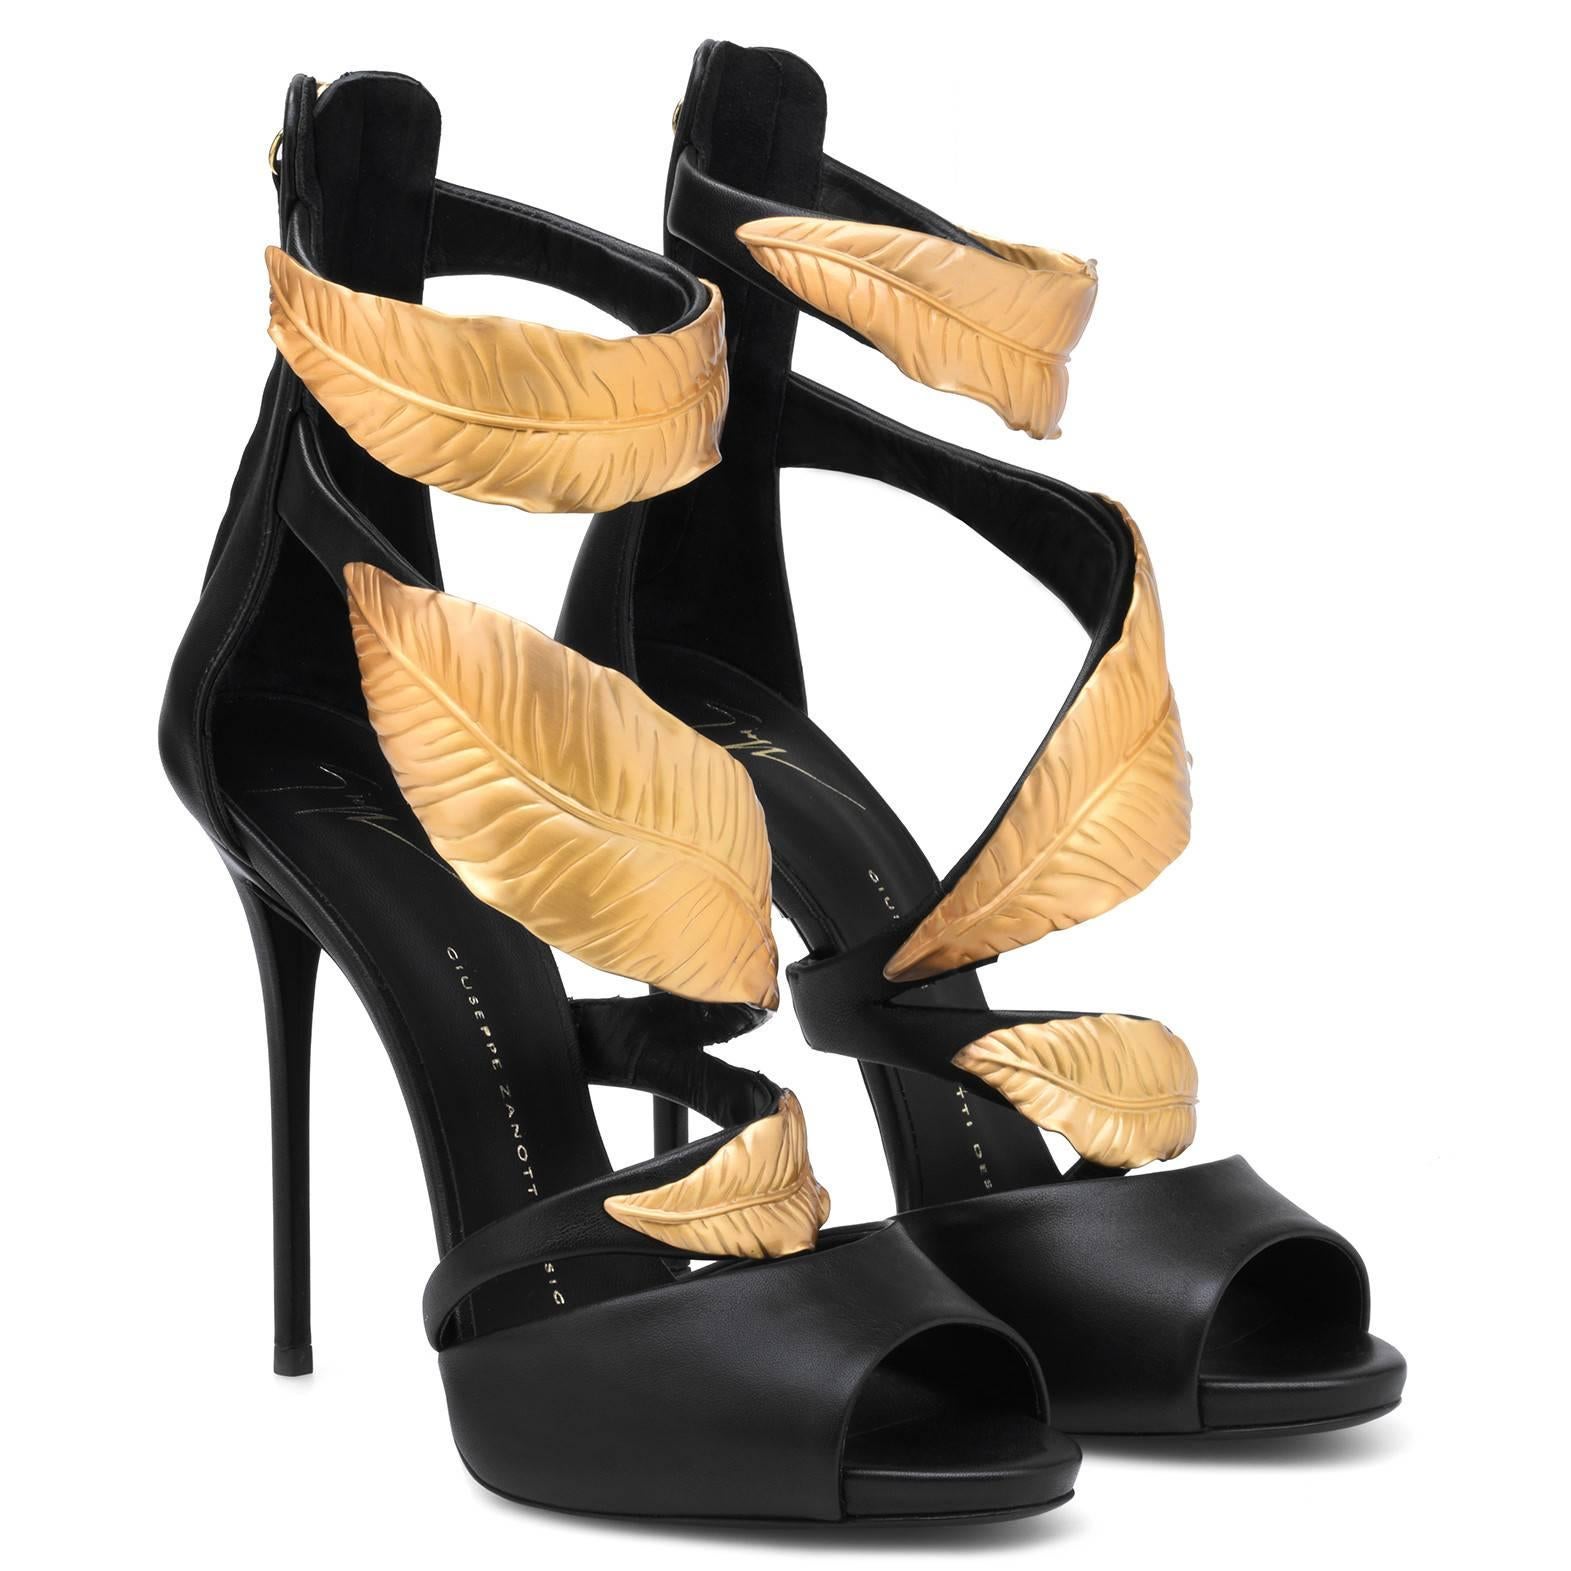 Giuseppe Zanotti New Black Leather Gold Leaf Evening Sandals Heels in Box 

Size IT 36.5
Leather 
Gold tone hardware
Made in Italy
Ankle zip closure
Heel height 4.75